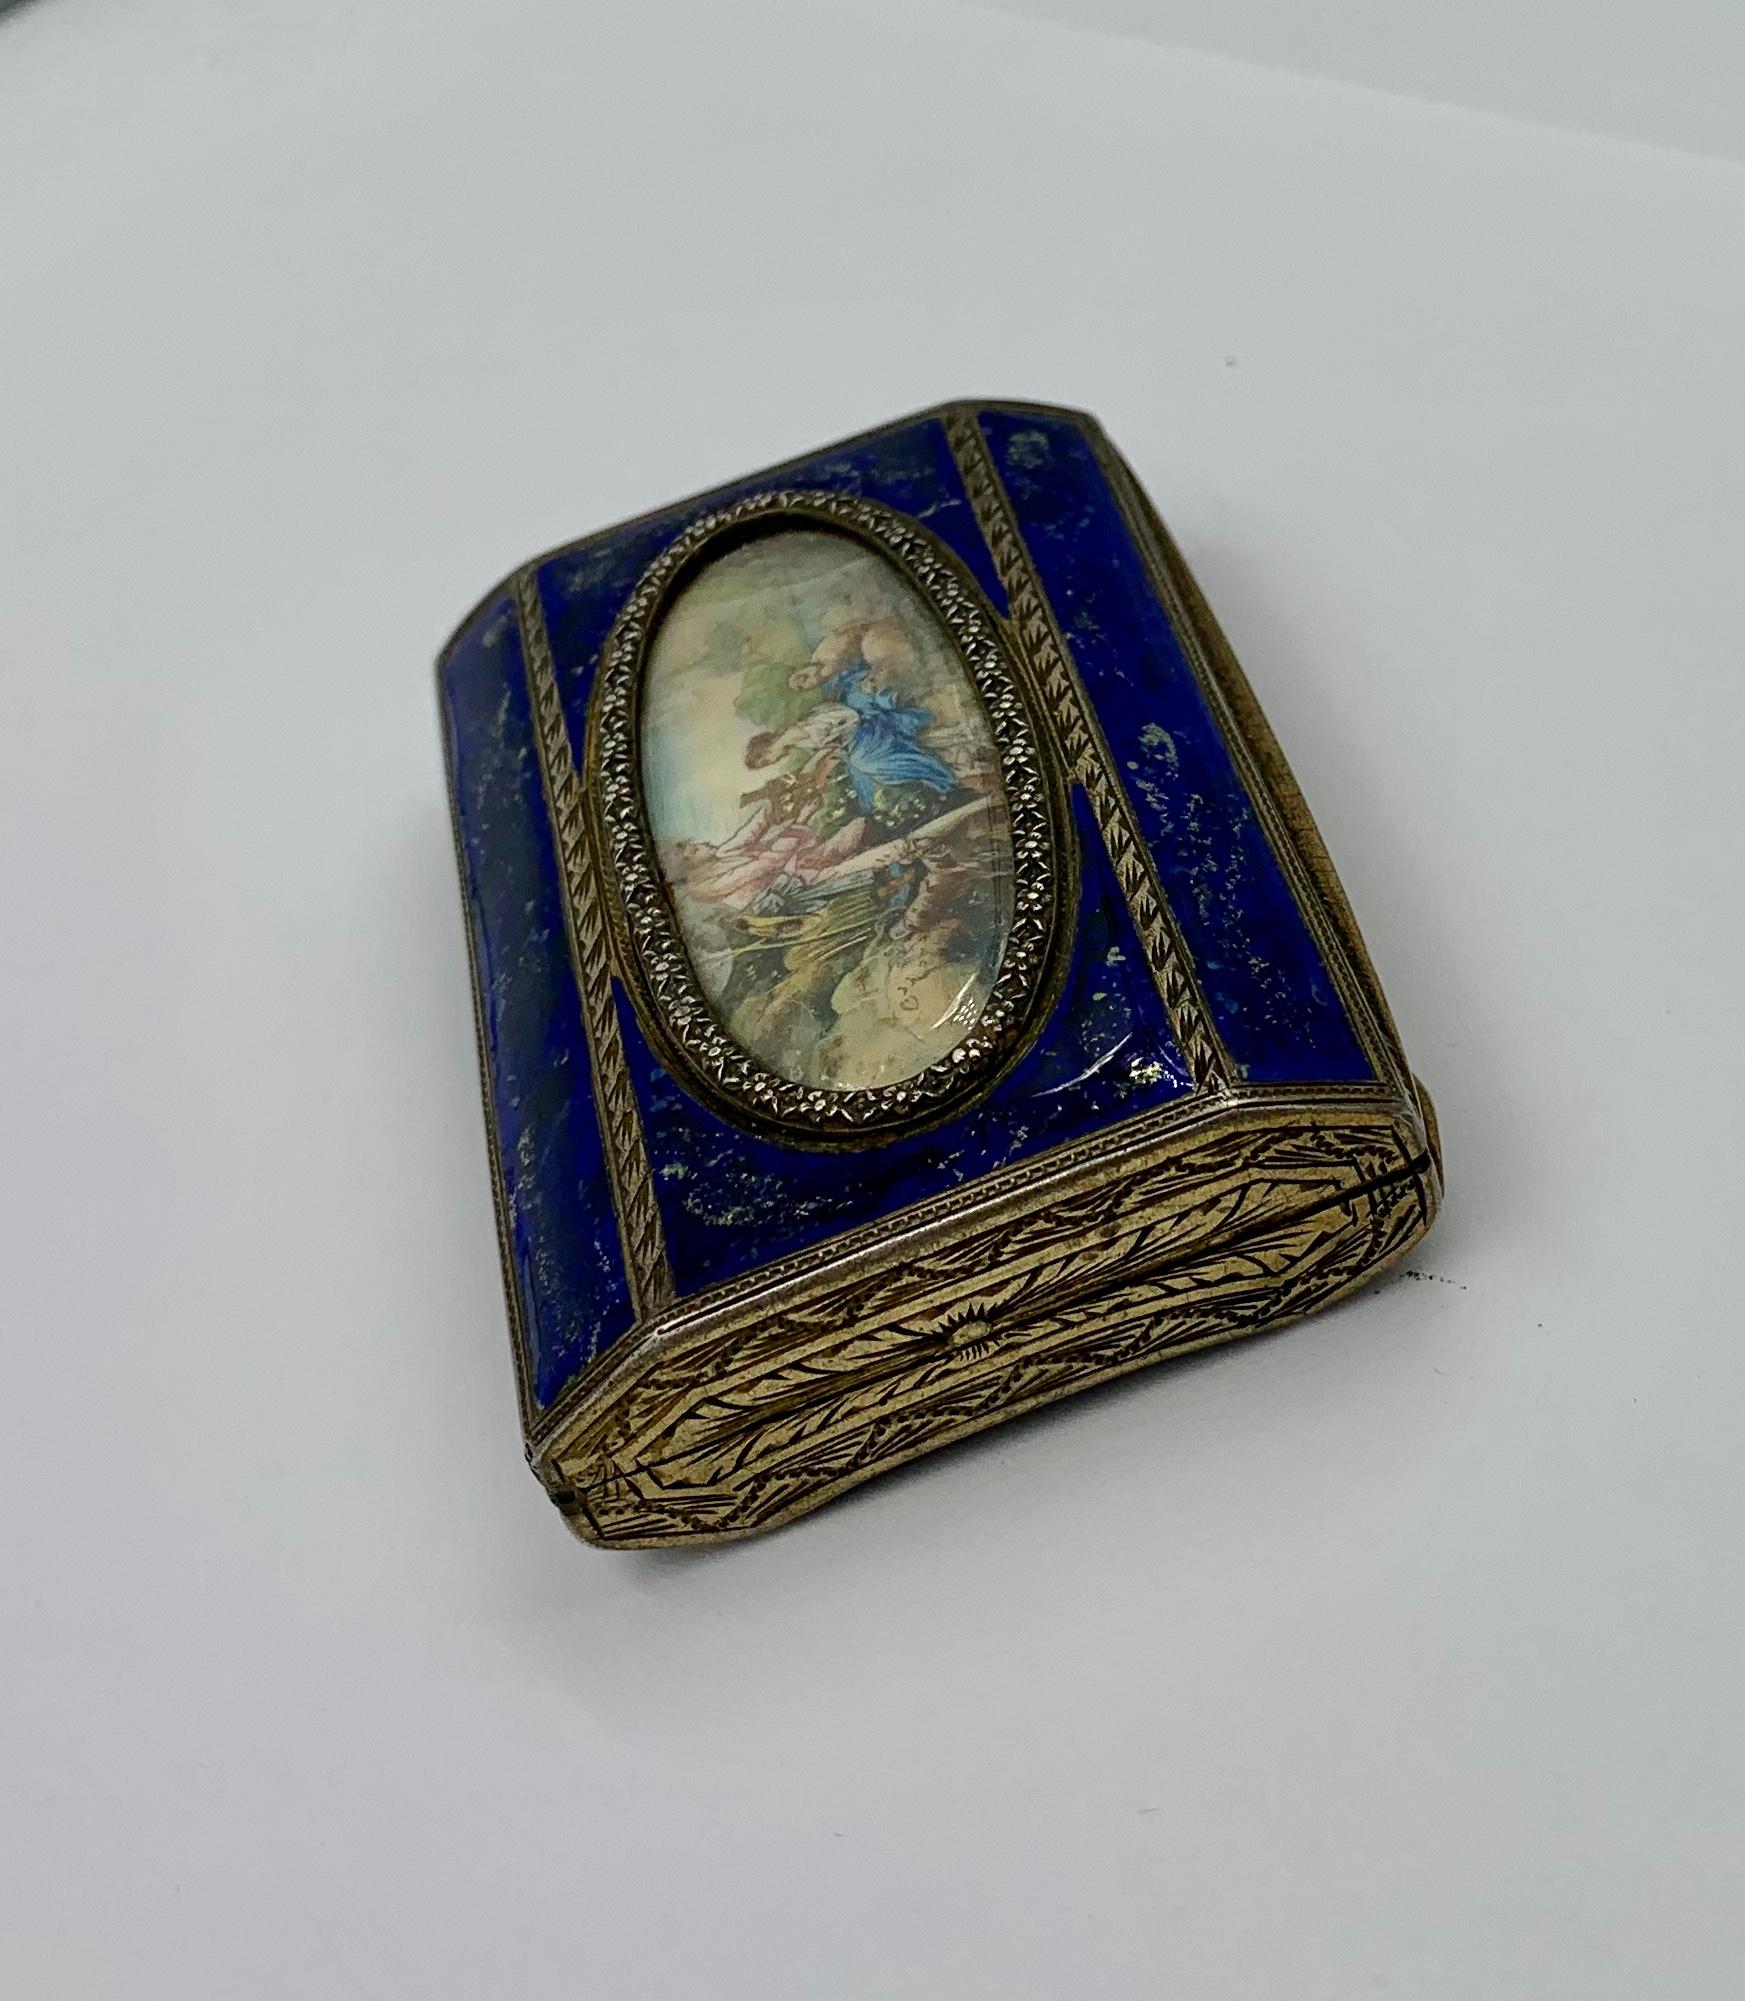 Women's or Men's Antique Silver Enamel Box Hand Painted Courting Miniature Bird Cage Dog Lamb